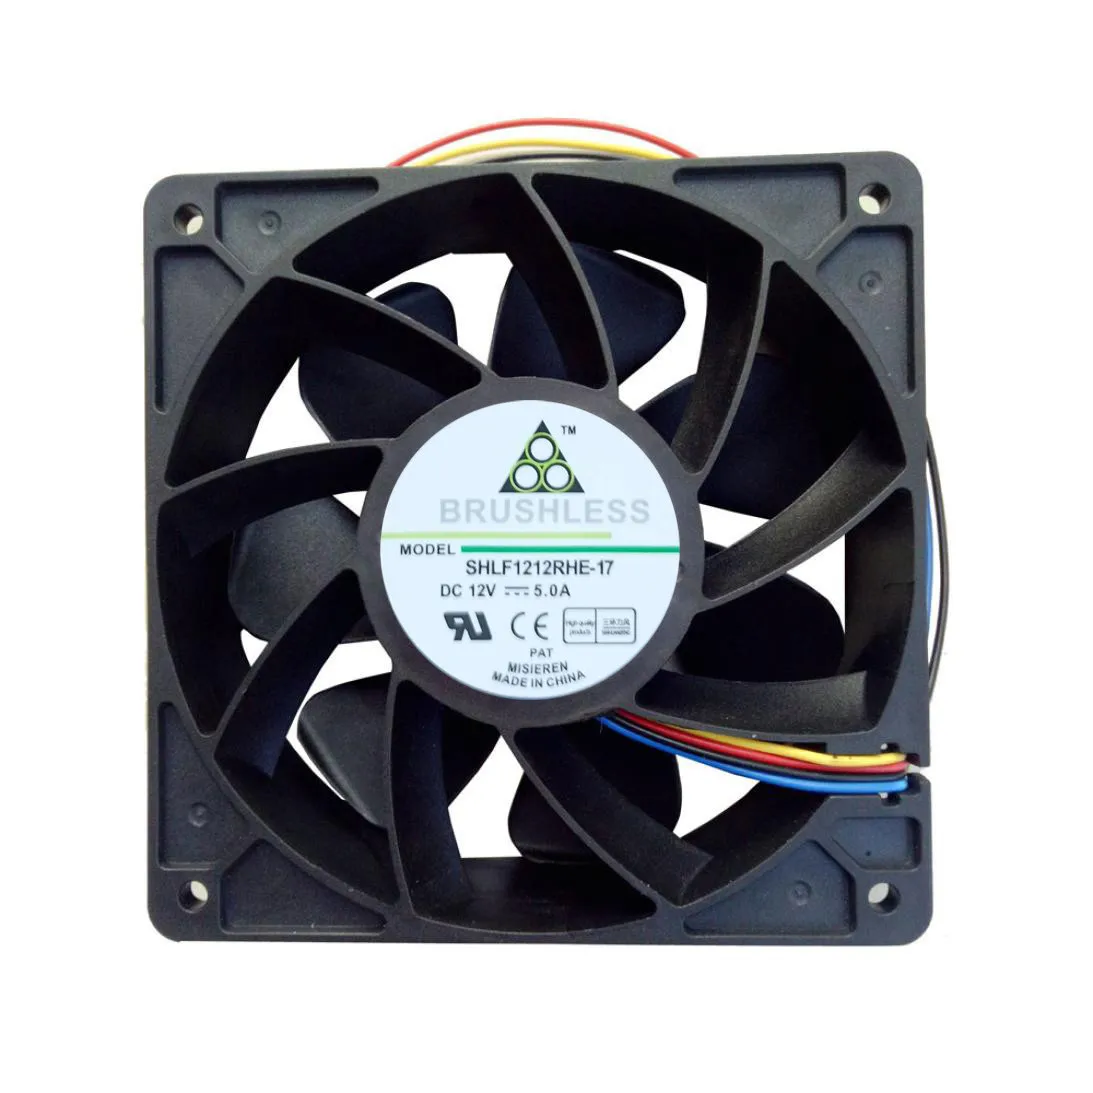 Cooling Fan Replacement 7500RPM 4-pin Connector For Antminer Bitmain S7 S9 Black 